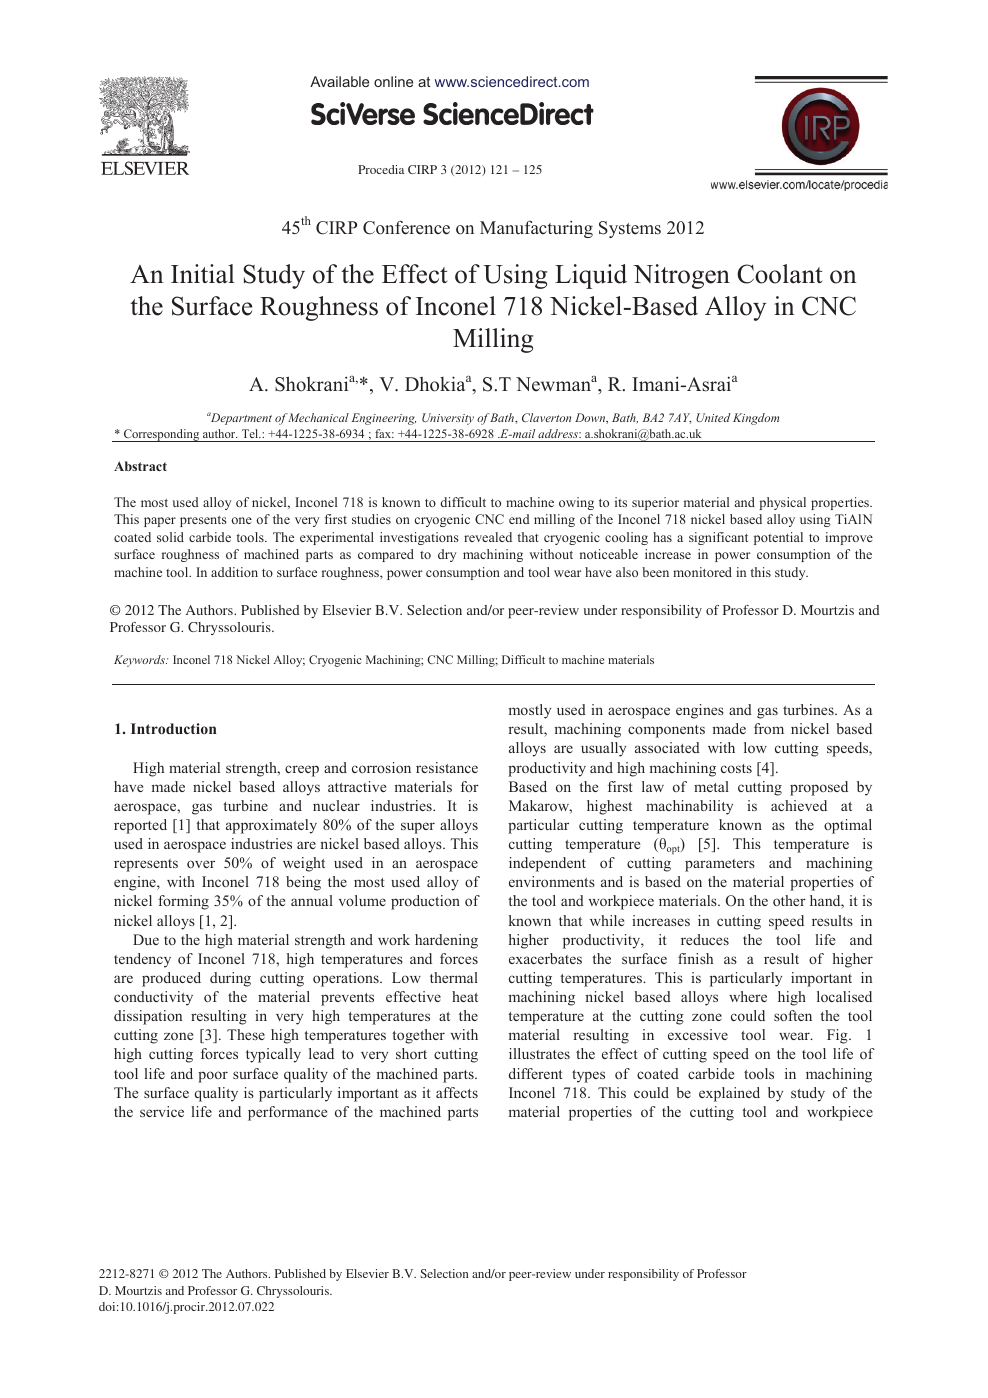 An Initial Study Of The Effect Of Using Liquid Nitrogen Coolant On The Surface Roughness Of Inconel 718 Nickel Based Alloy In Cnc Milling Topic Of Research Paper In Mechanical Engineering Download